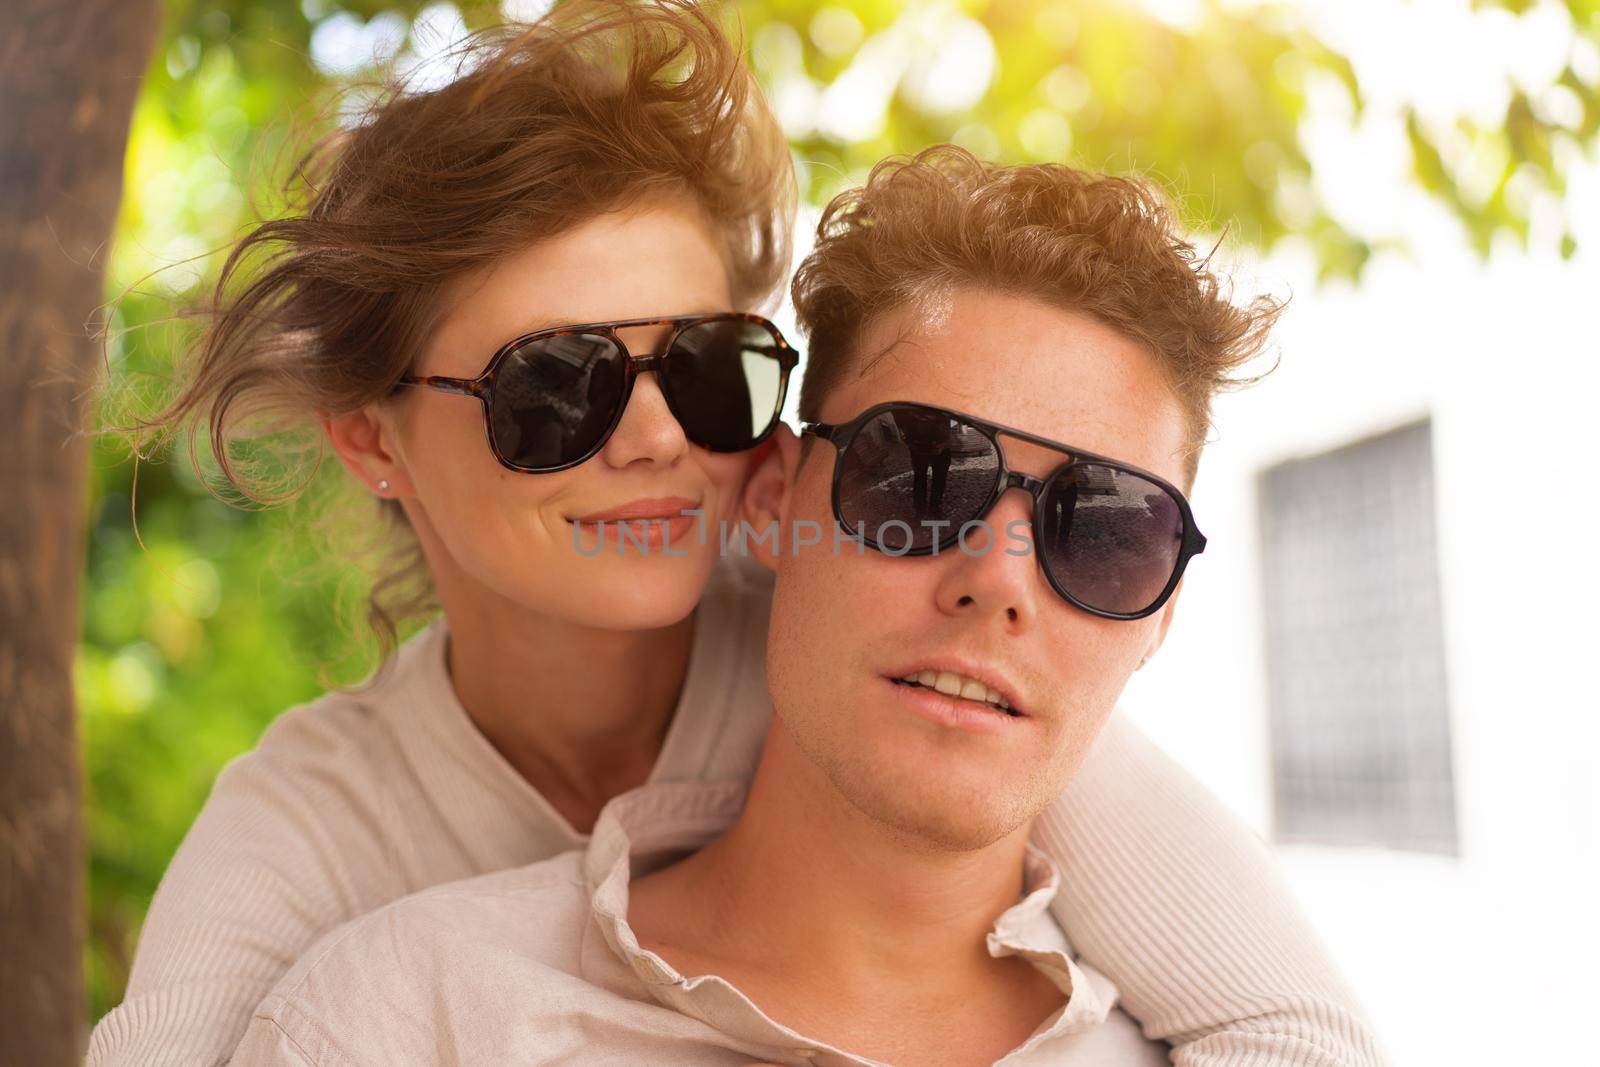 Smiling beautiful woman and her handsome boyfriend. Woman embrace summer day. Happy cheerful couple in sunglasses walking old city park. Couple posing on the street near green tree Headshot portrait